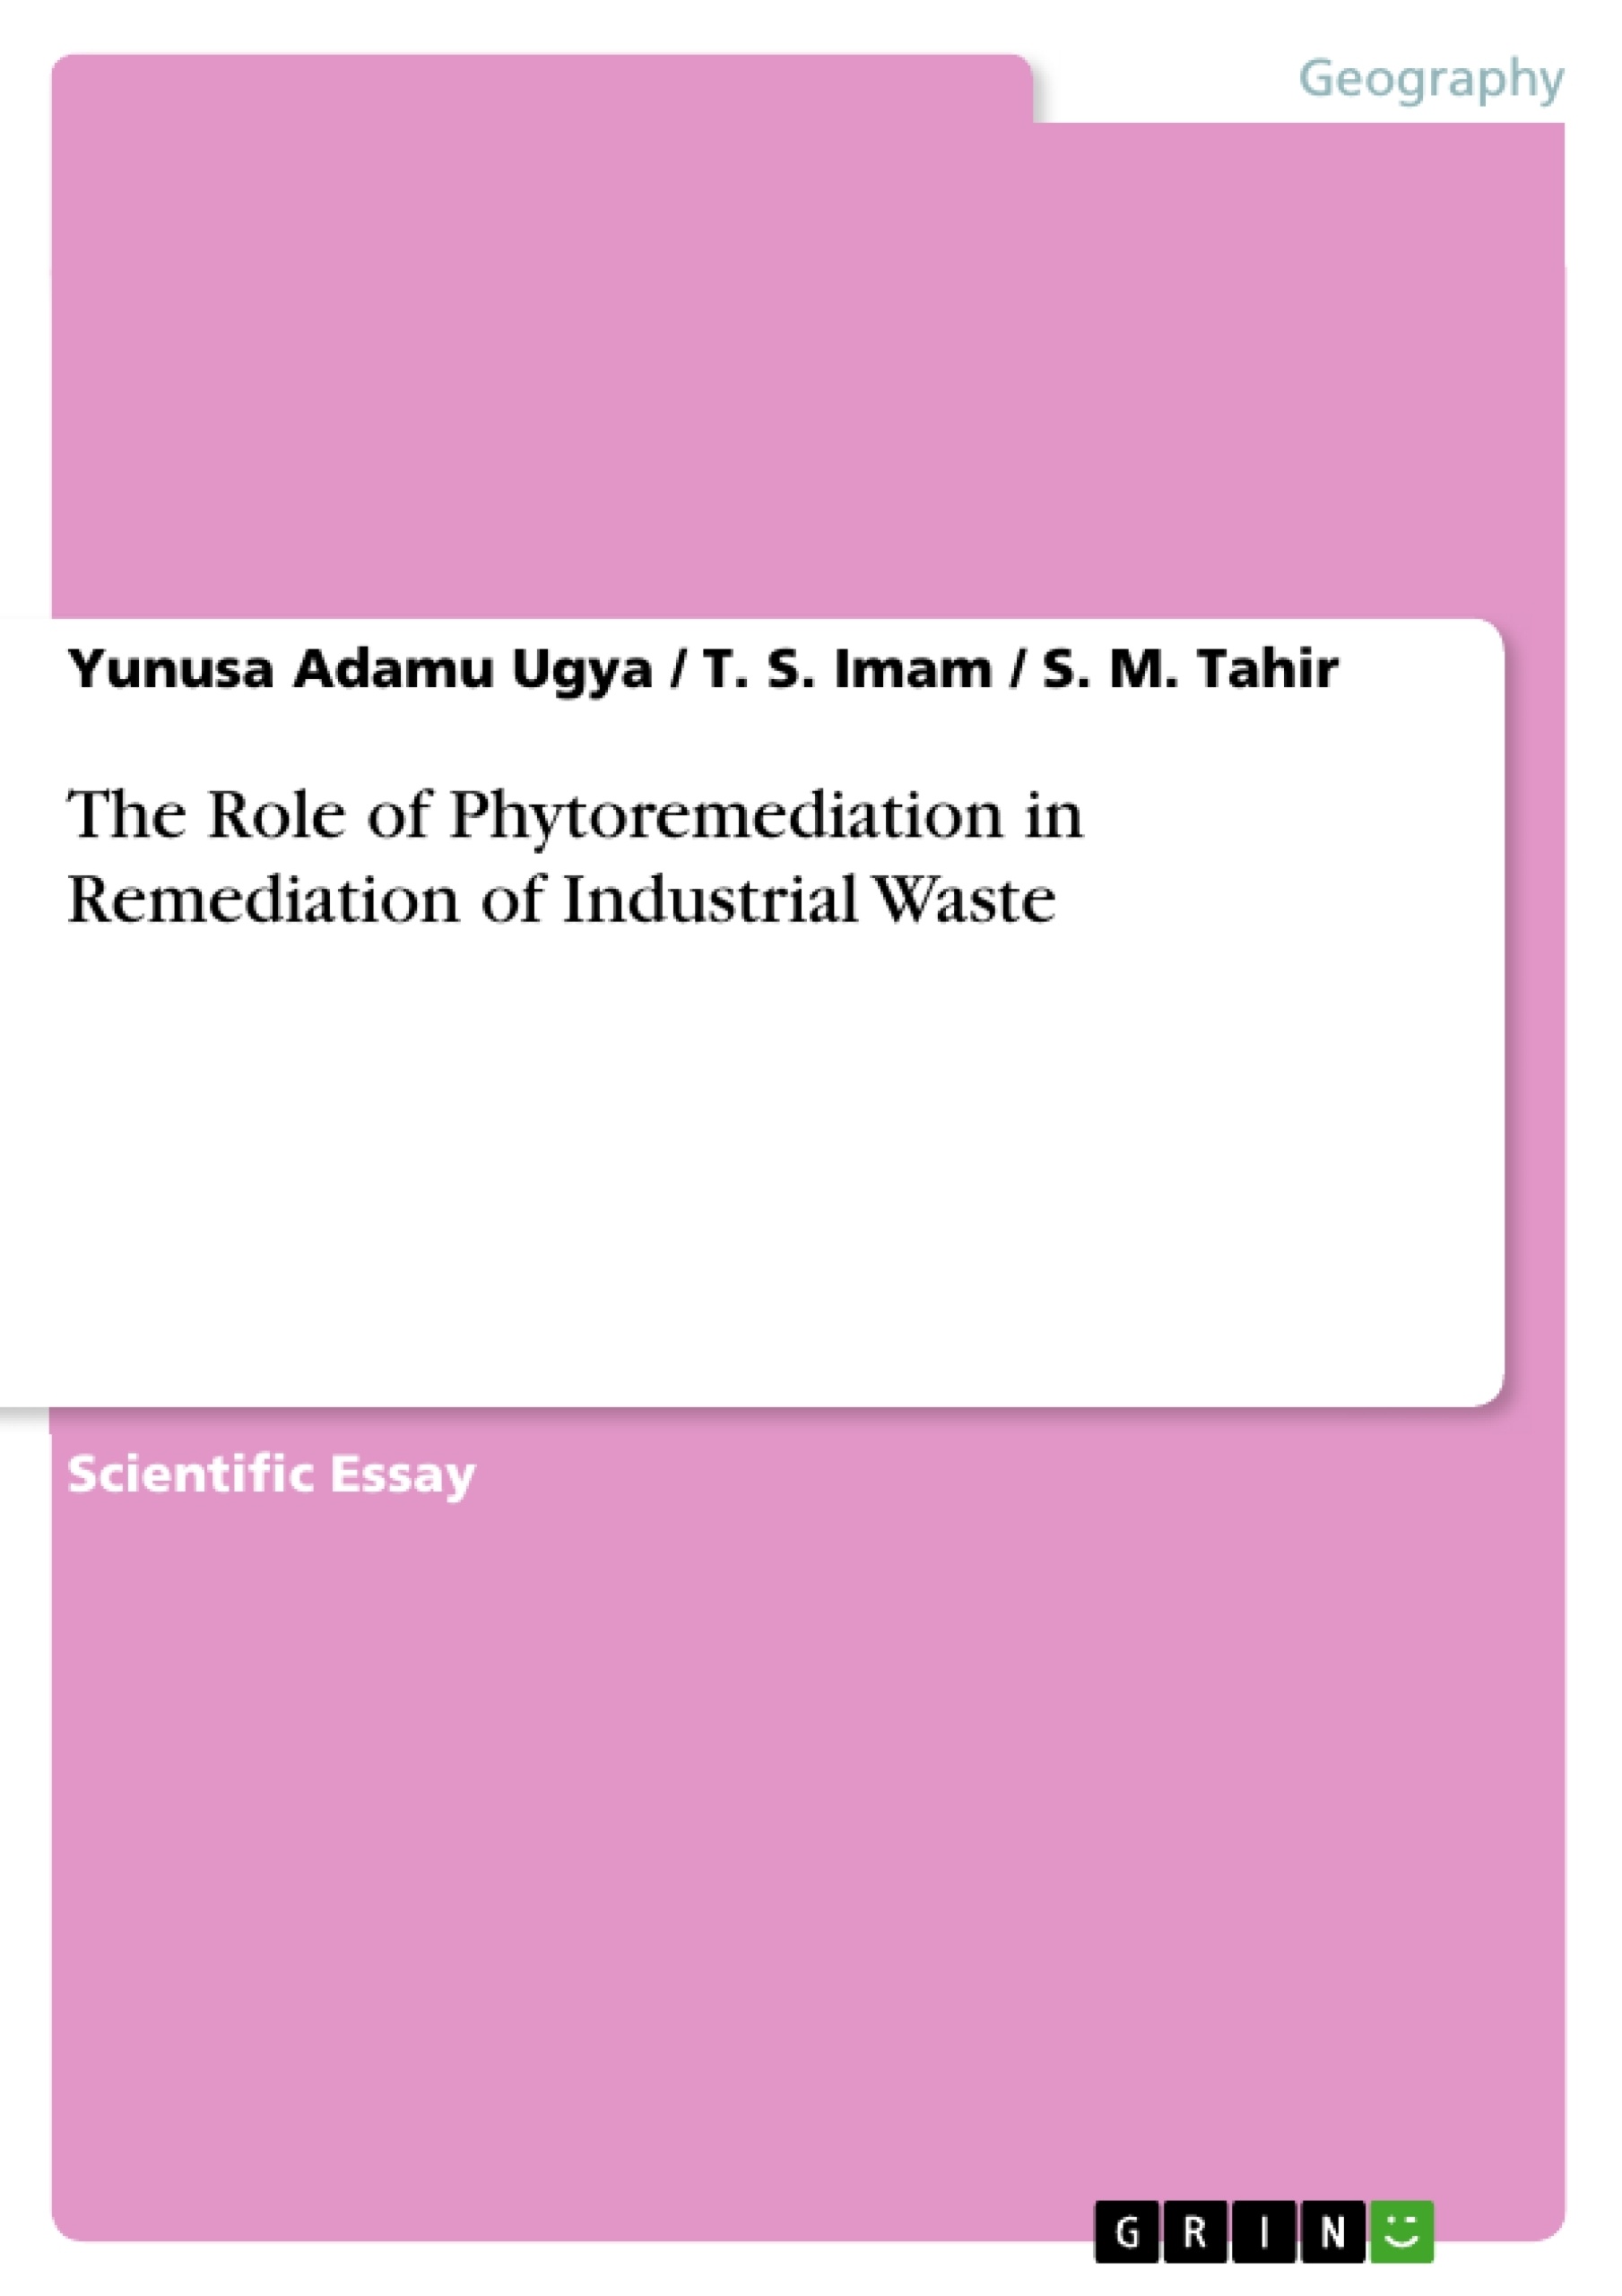 Titel: The Role of Phytoremediation in Remediation of Industrial Waste